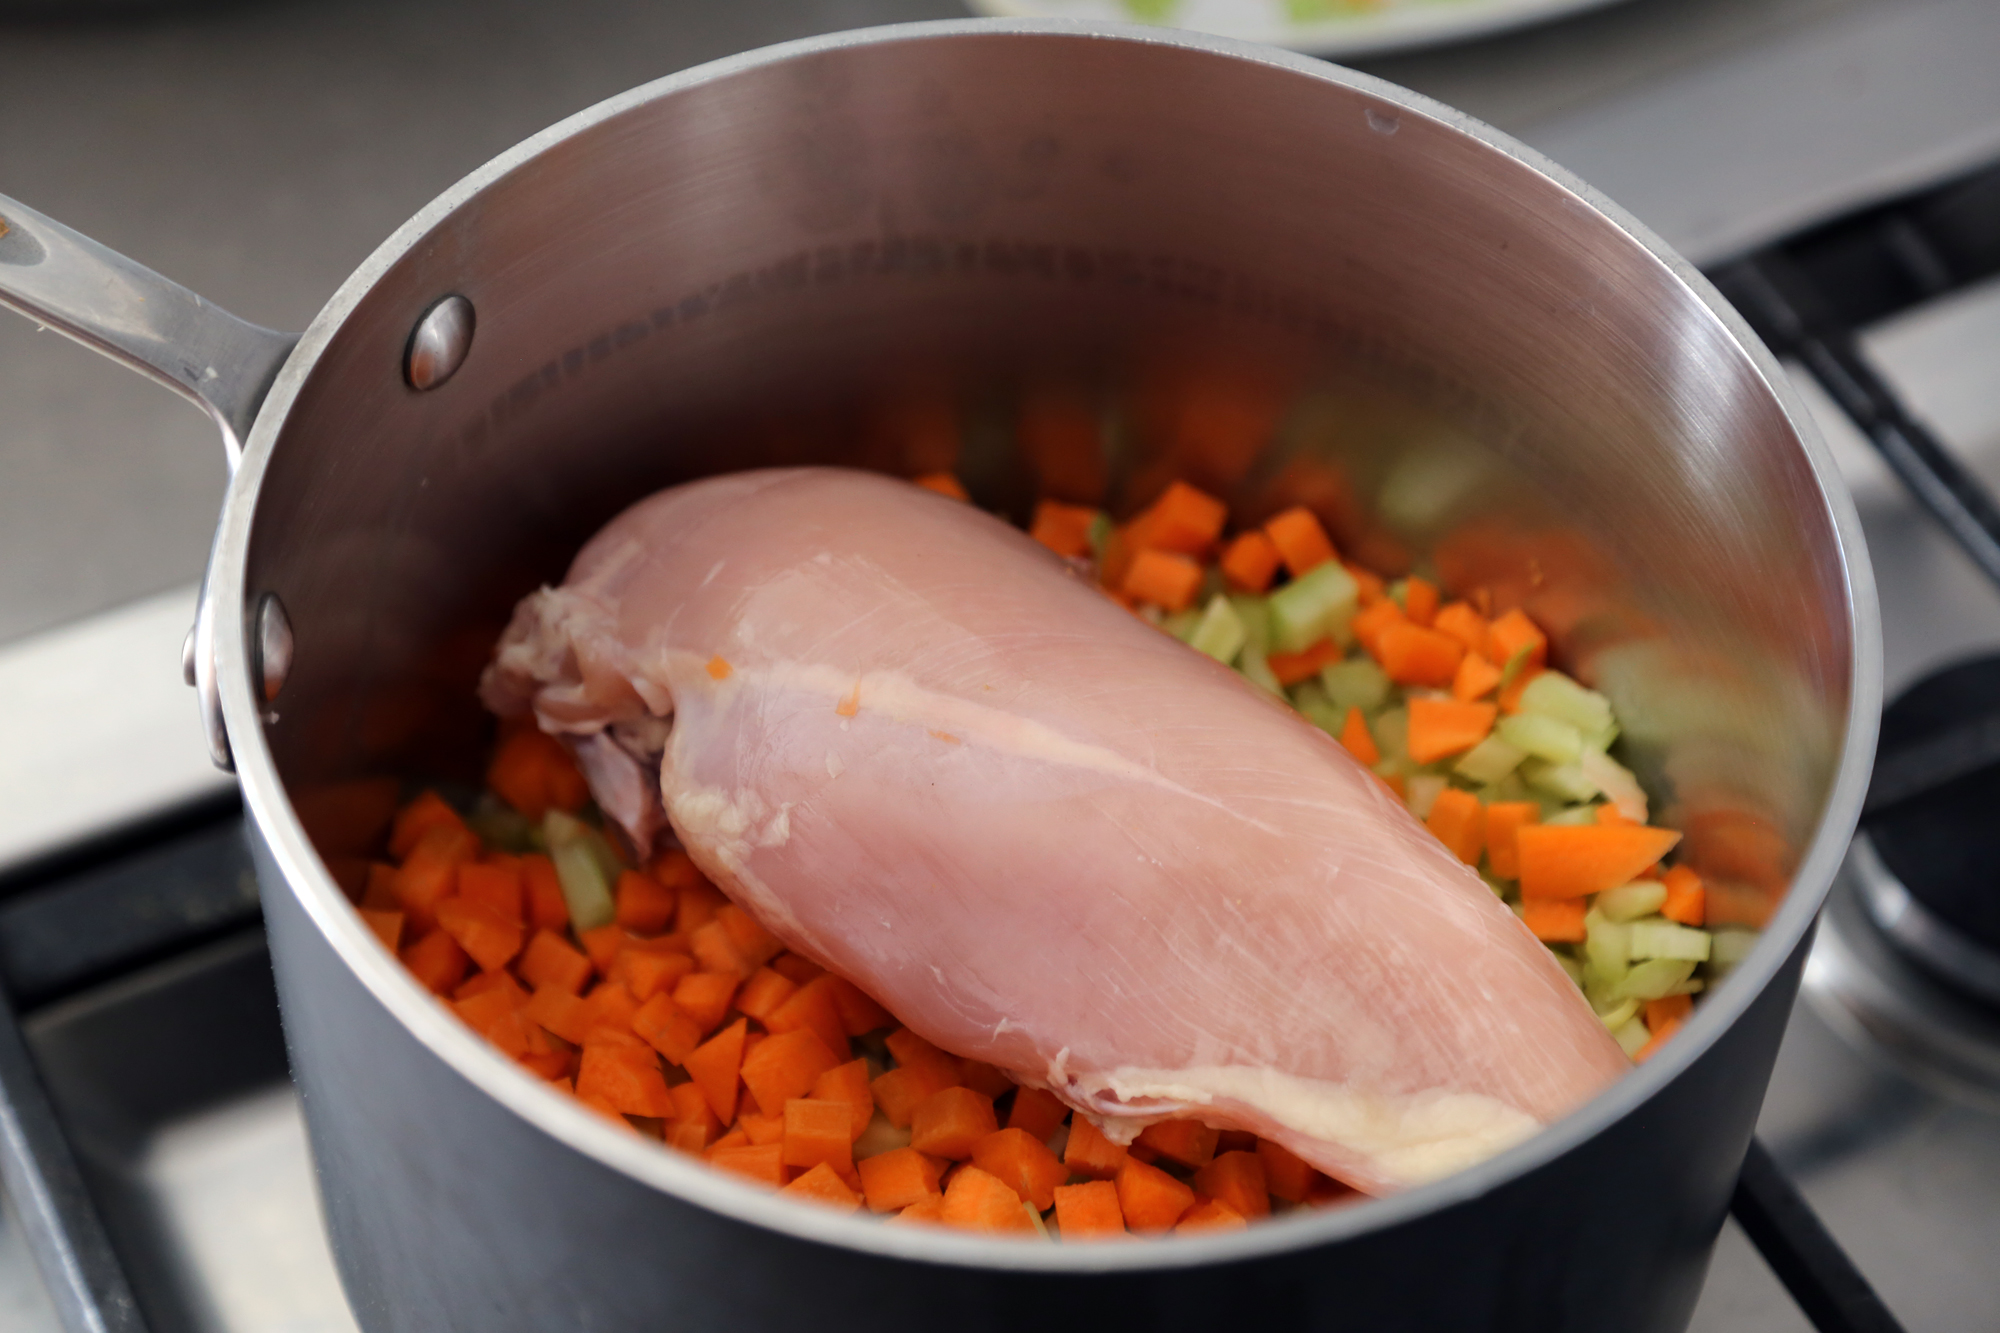 Add the prepped vegetables and chicken to the pot.